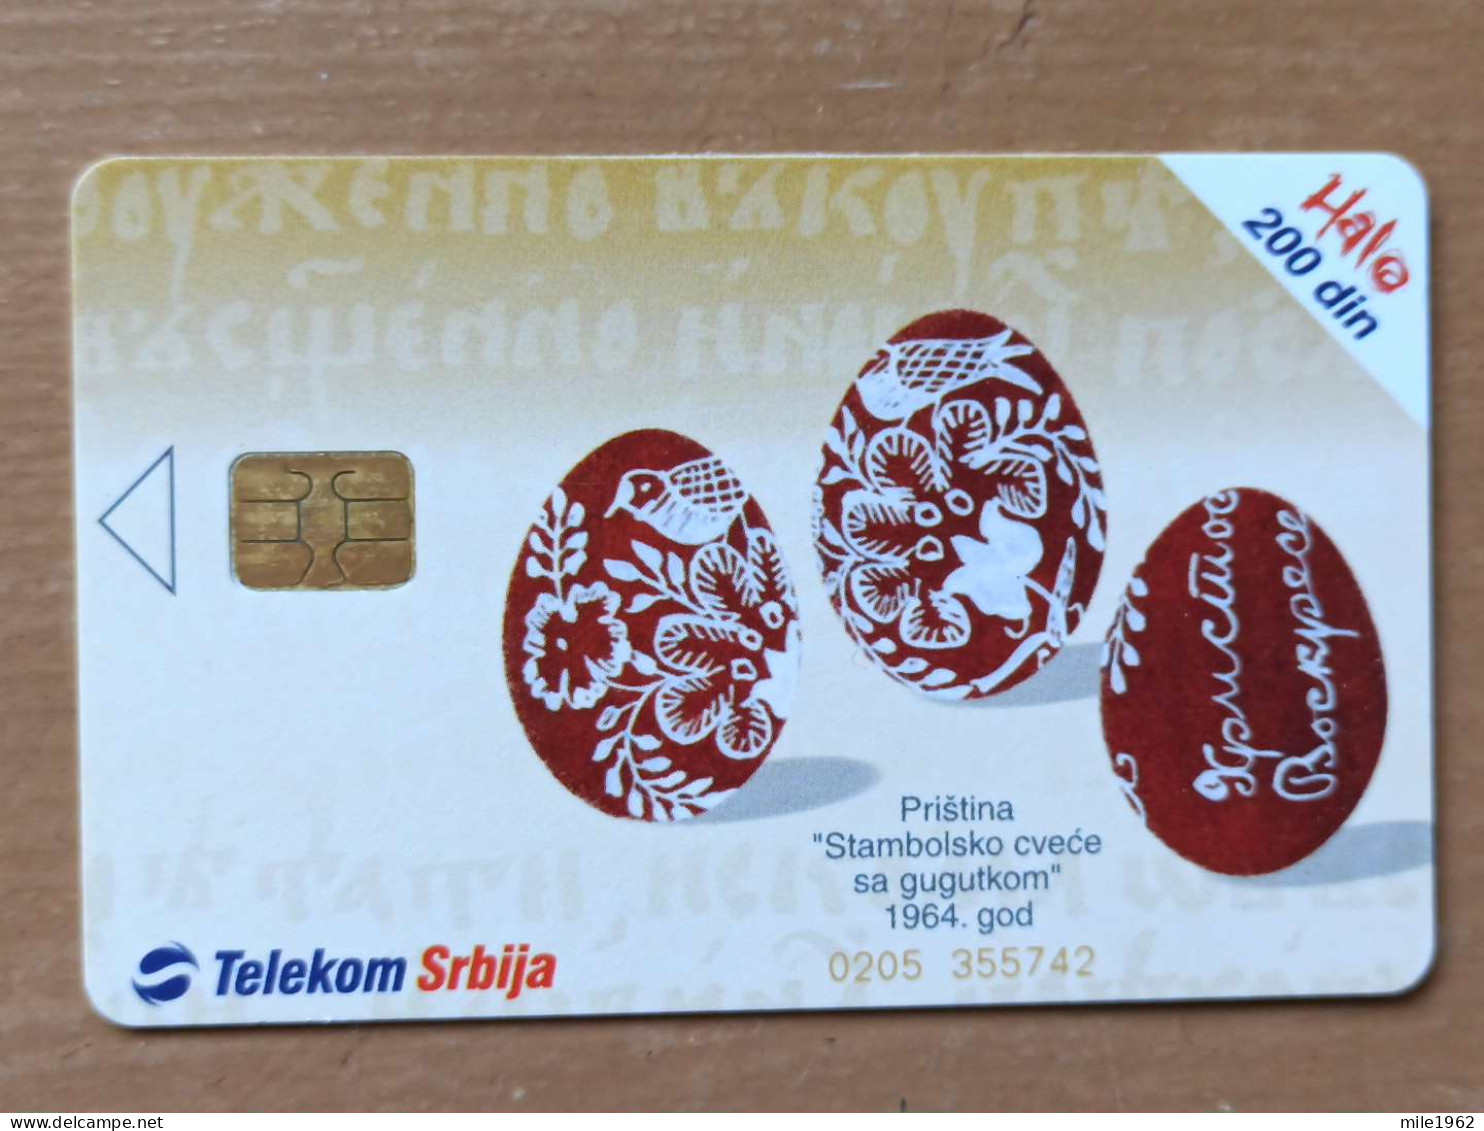 T-243 - SERBIA, TELECARD, PHONECARD, PAQUES, EASTER - Other - Europe